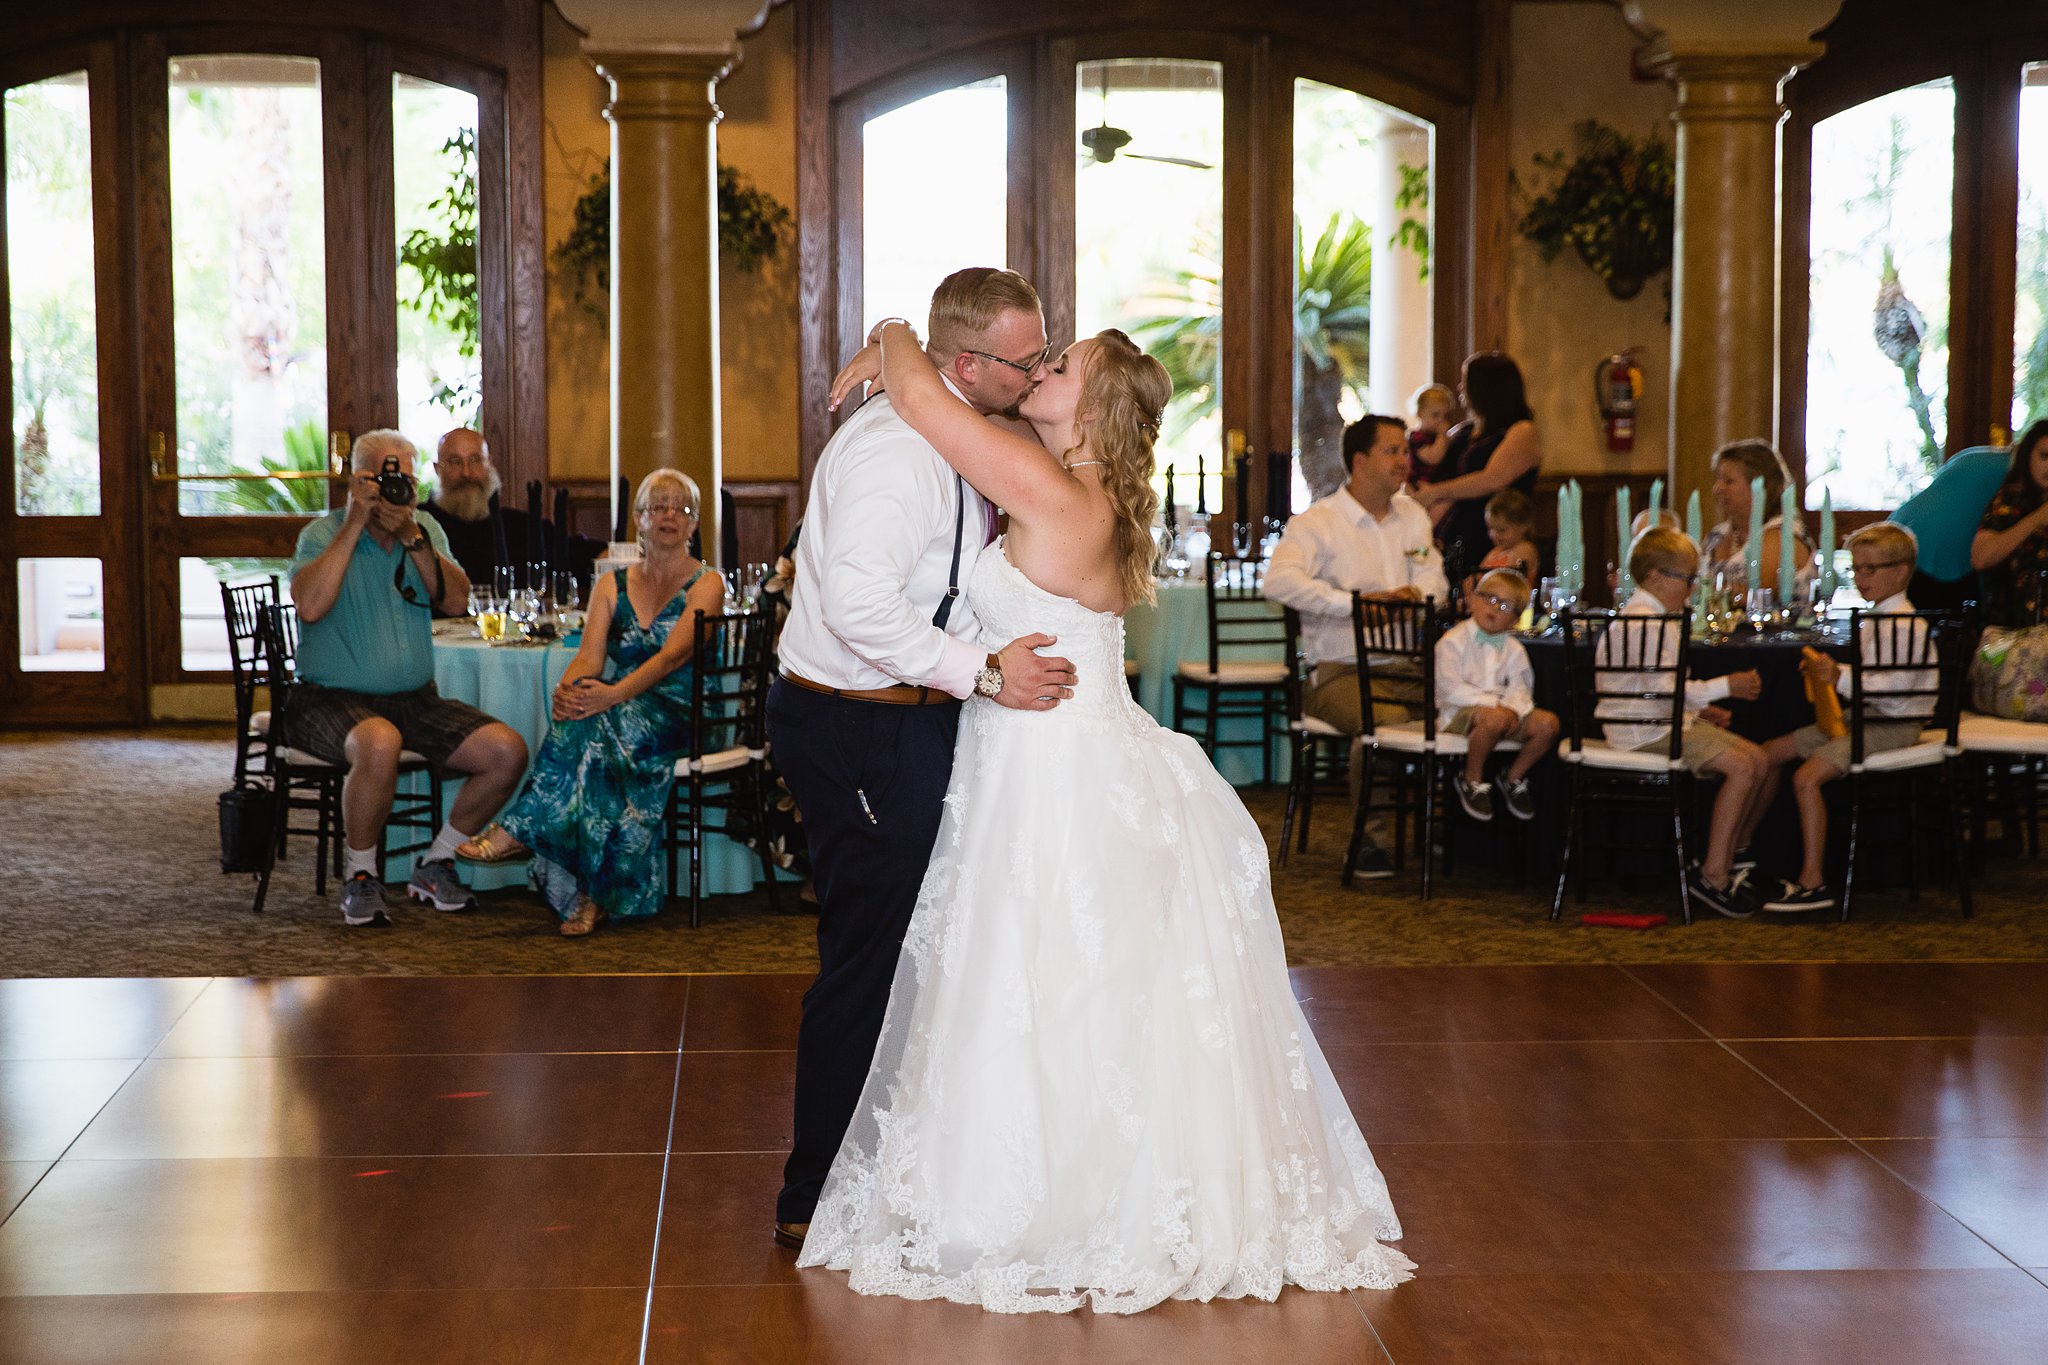 Bride and groom sharing first dance at their Val Vista Lakes wedding reception by Arizona wedding photographer PMA Photography.